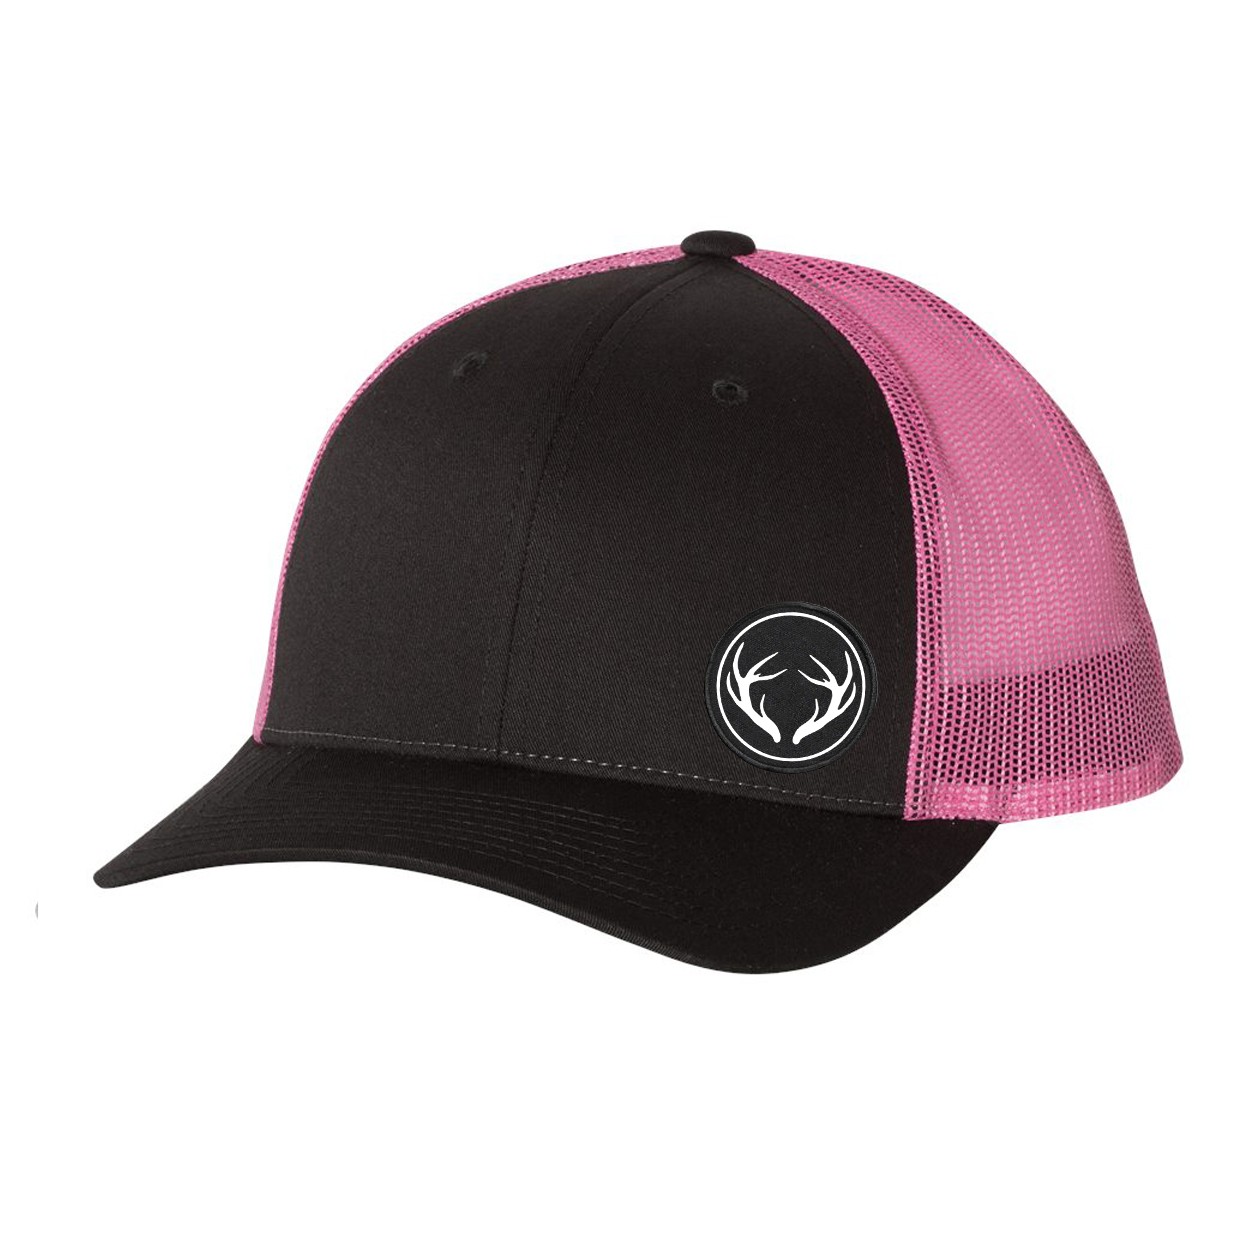 Hunt Rack Icon Logo Night Out Woven Circle Patch Snapback Trucker Hat Dark Gray/Neon Pink (White Logo)